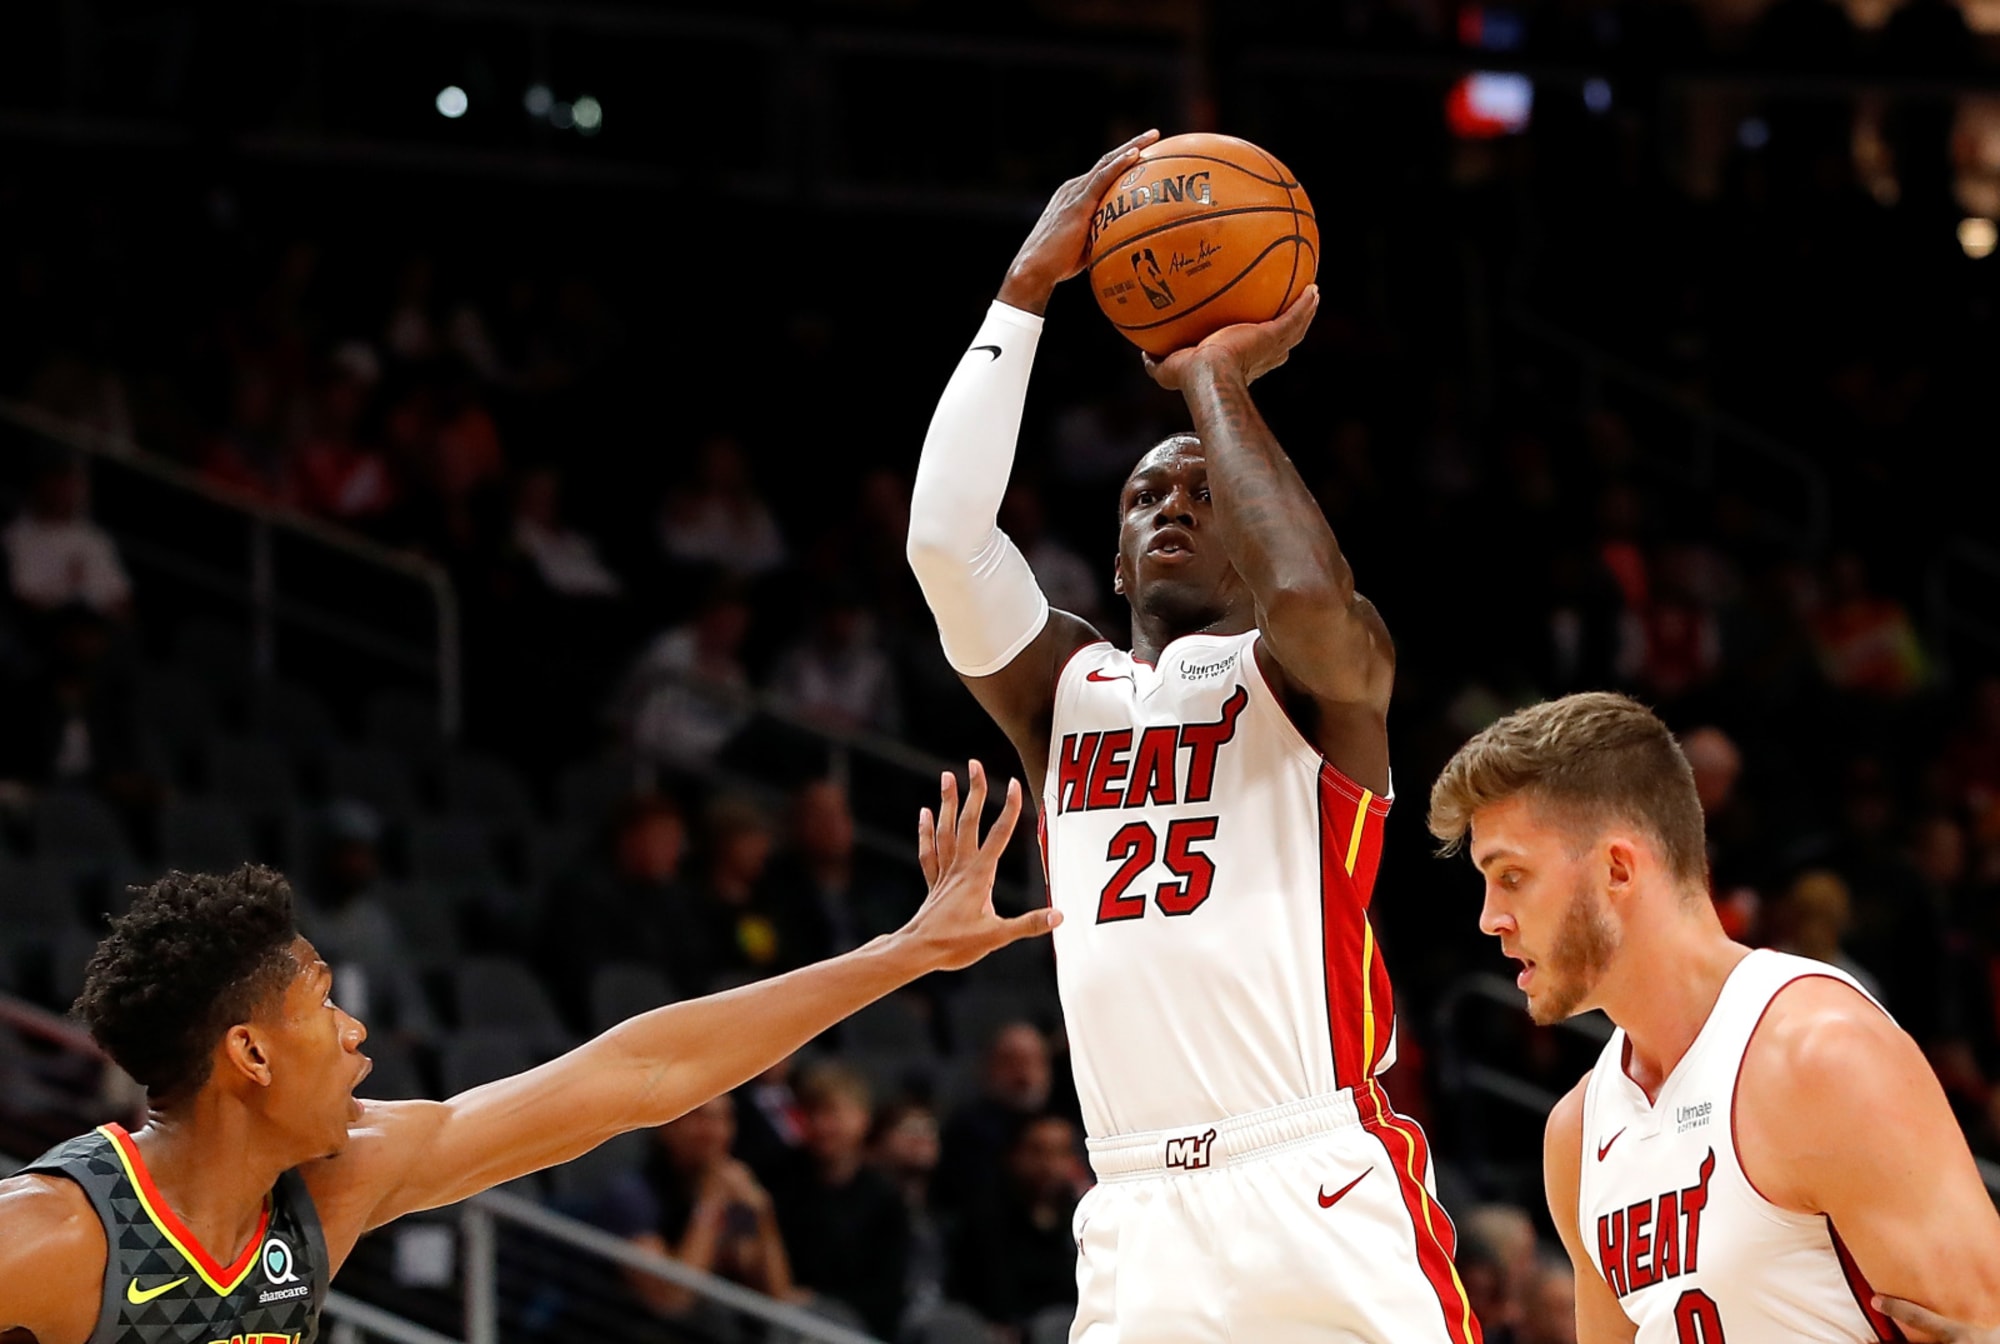 Miami Heat: Kendrick Nunn ears some respect from ROY voters